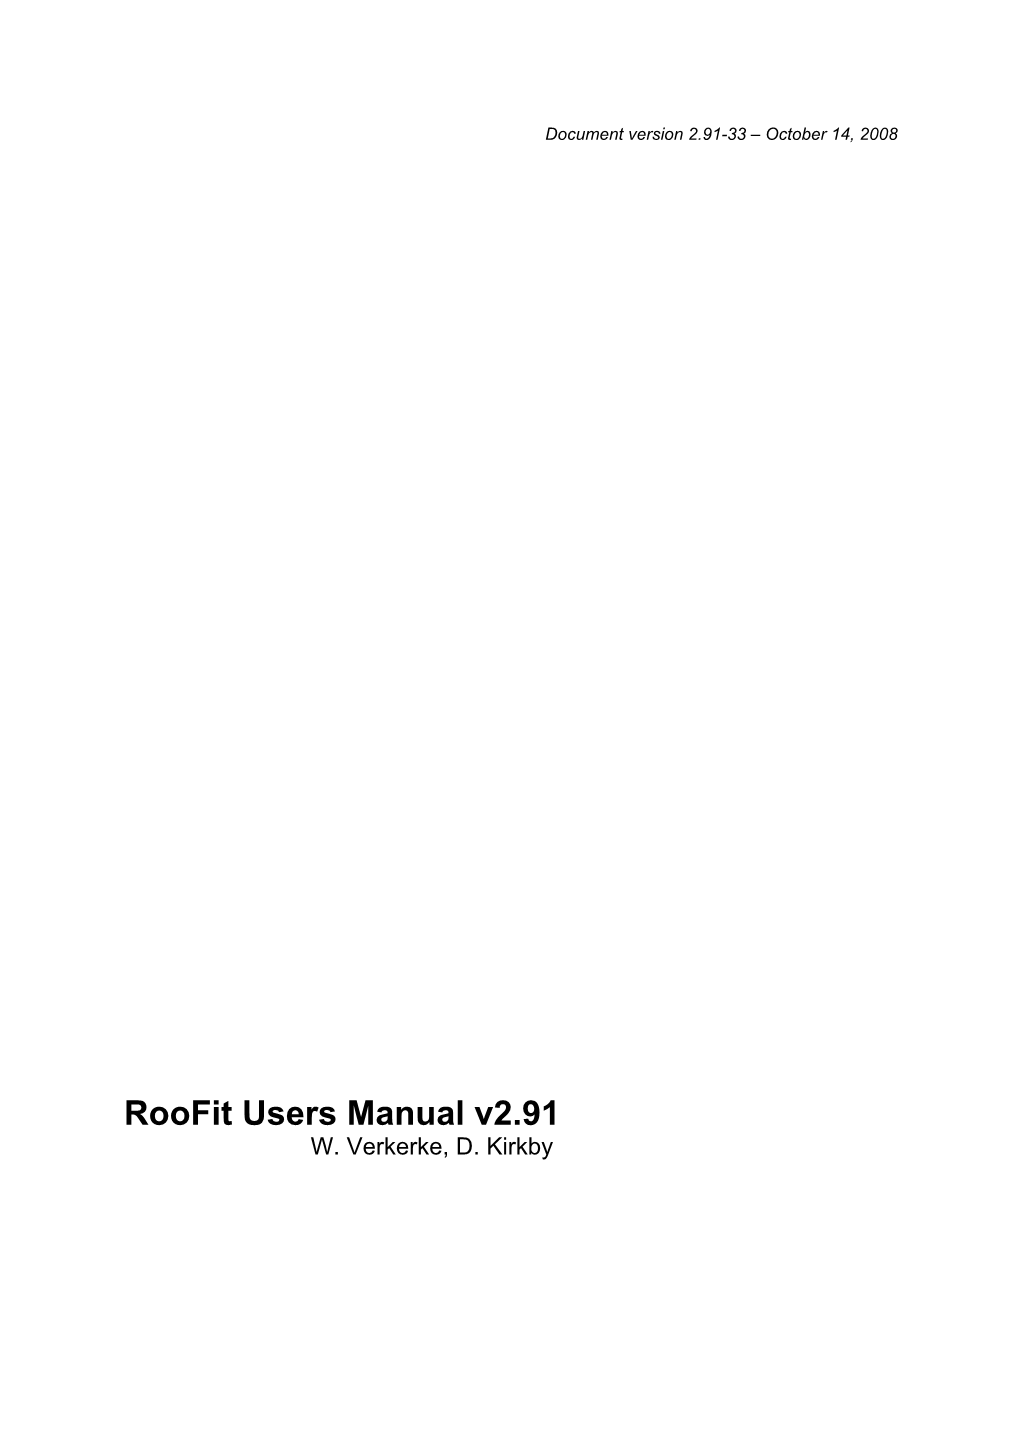 Roofit Users Manual V2.91 W